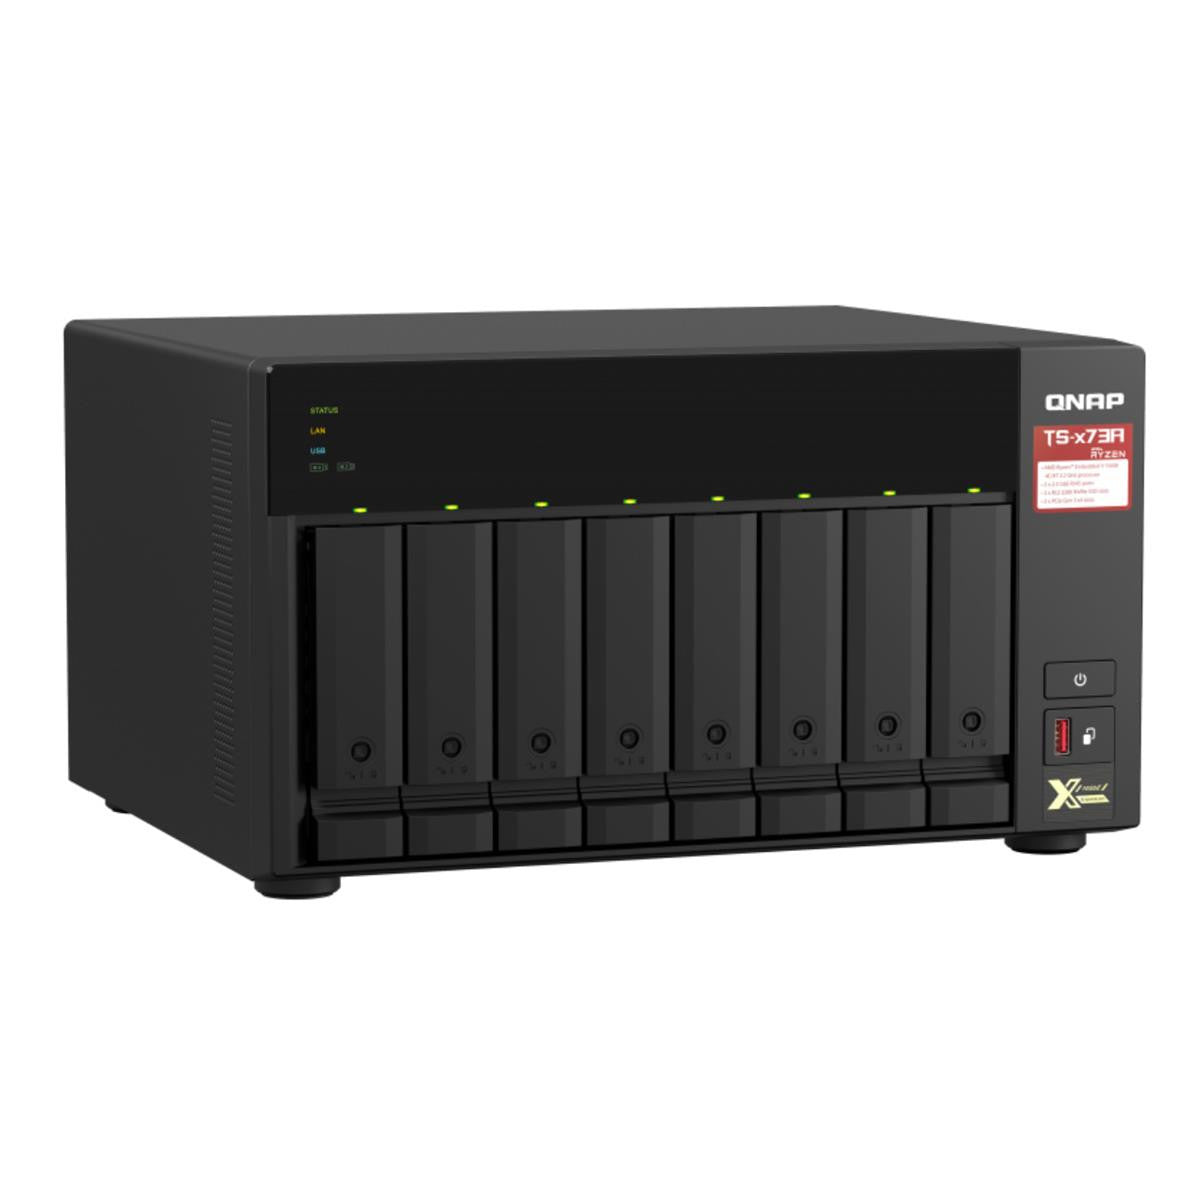 QNAP TS-873A 8-BAY NAS with 32GB DDR4 RAM and 112TB (8x14TB) Western Digital RED PLUS Drives Fully Assembled and Tested